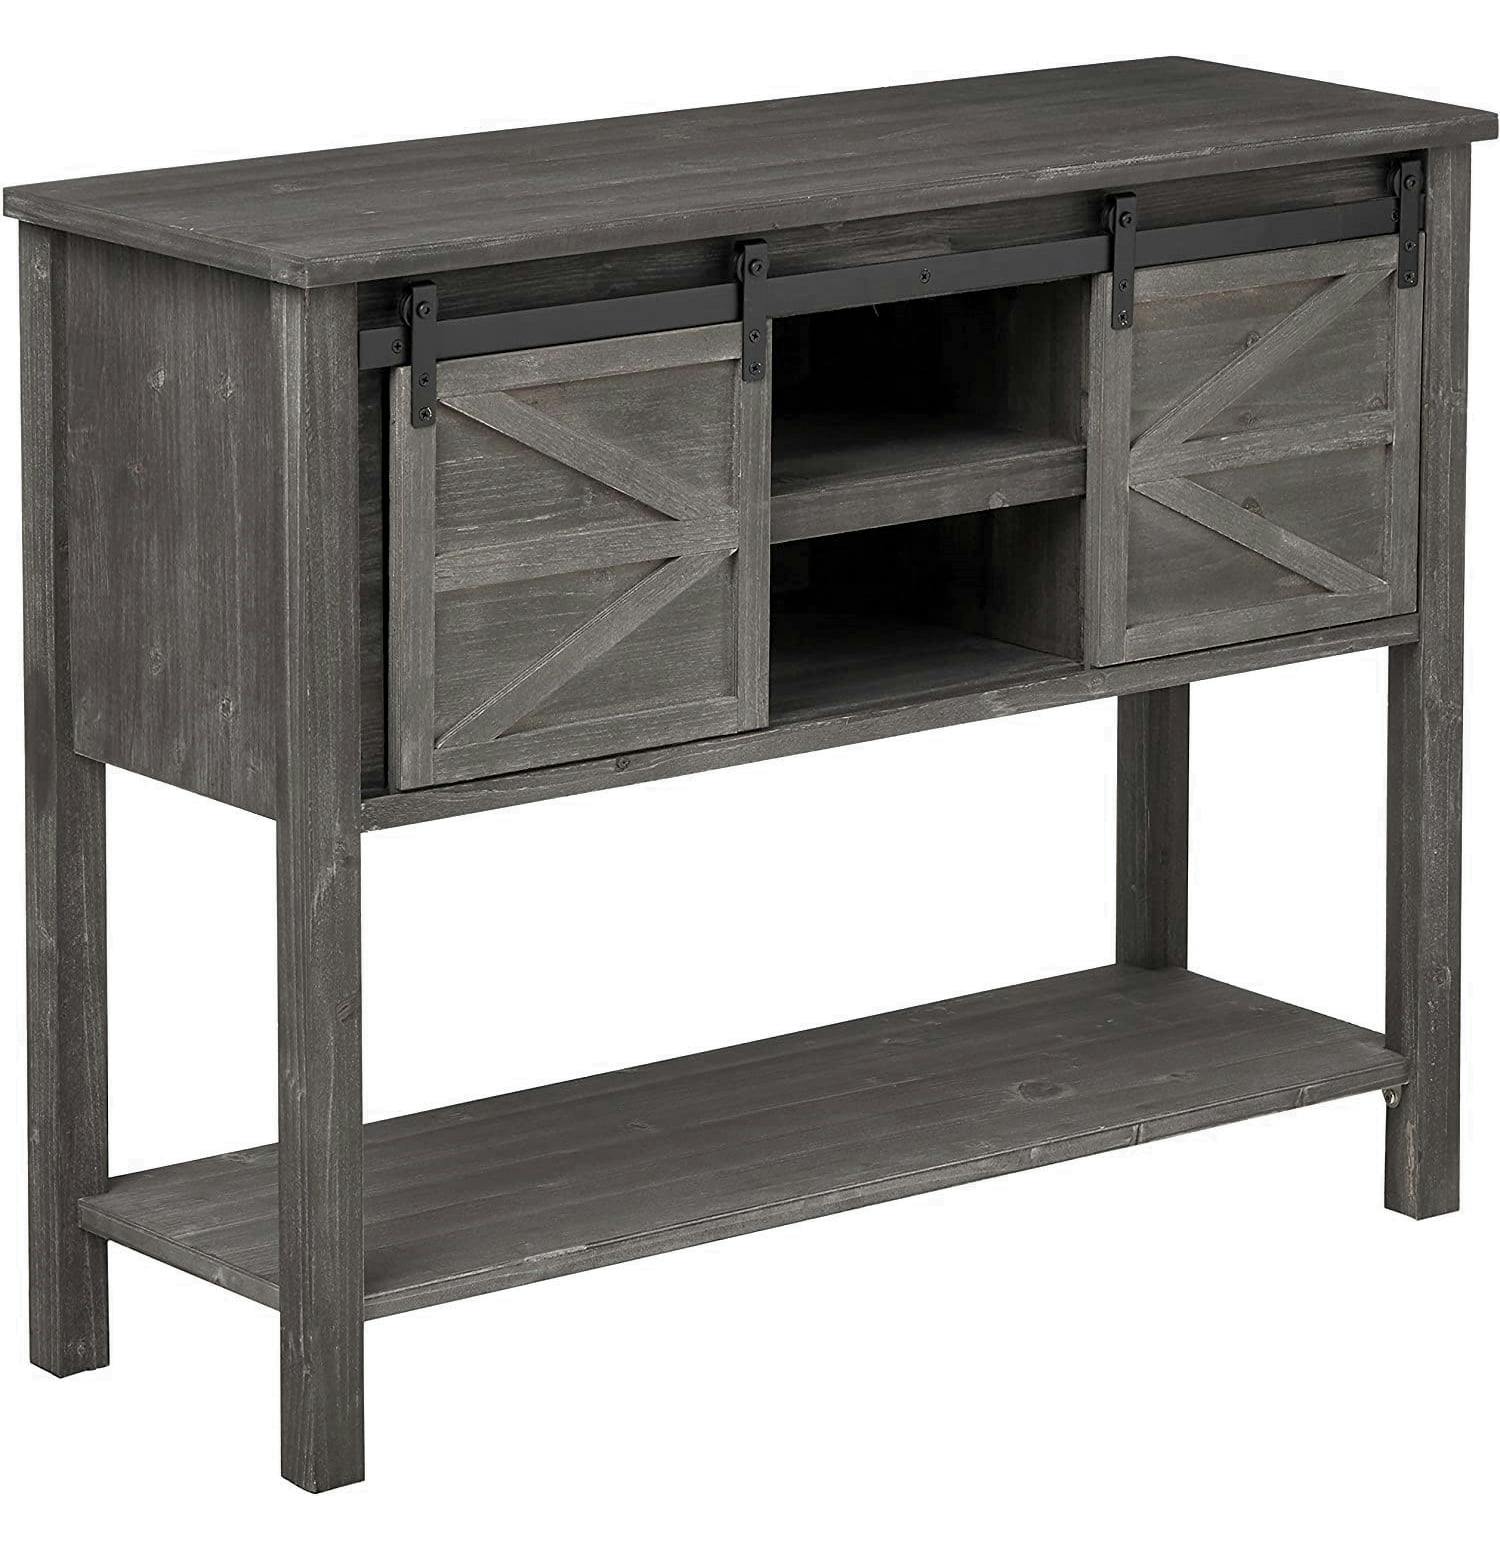 Distressed Grey Farmhouse Console Table with Sliding Barn Doors